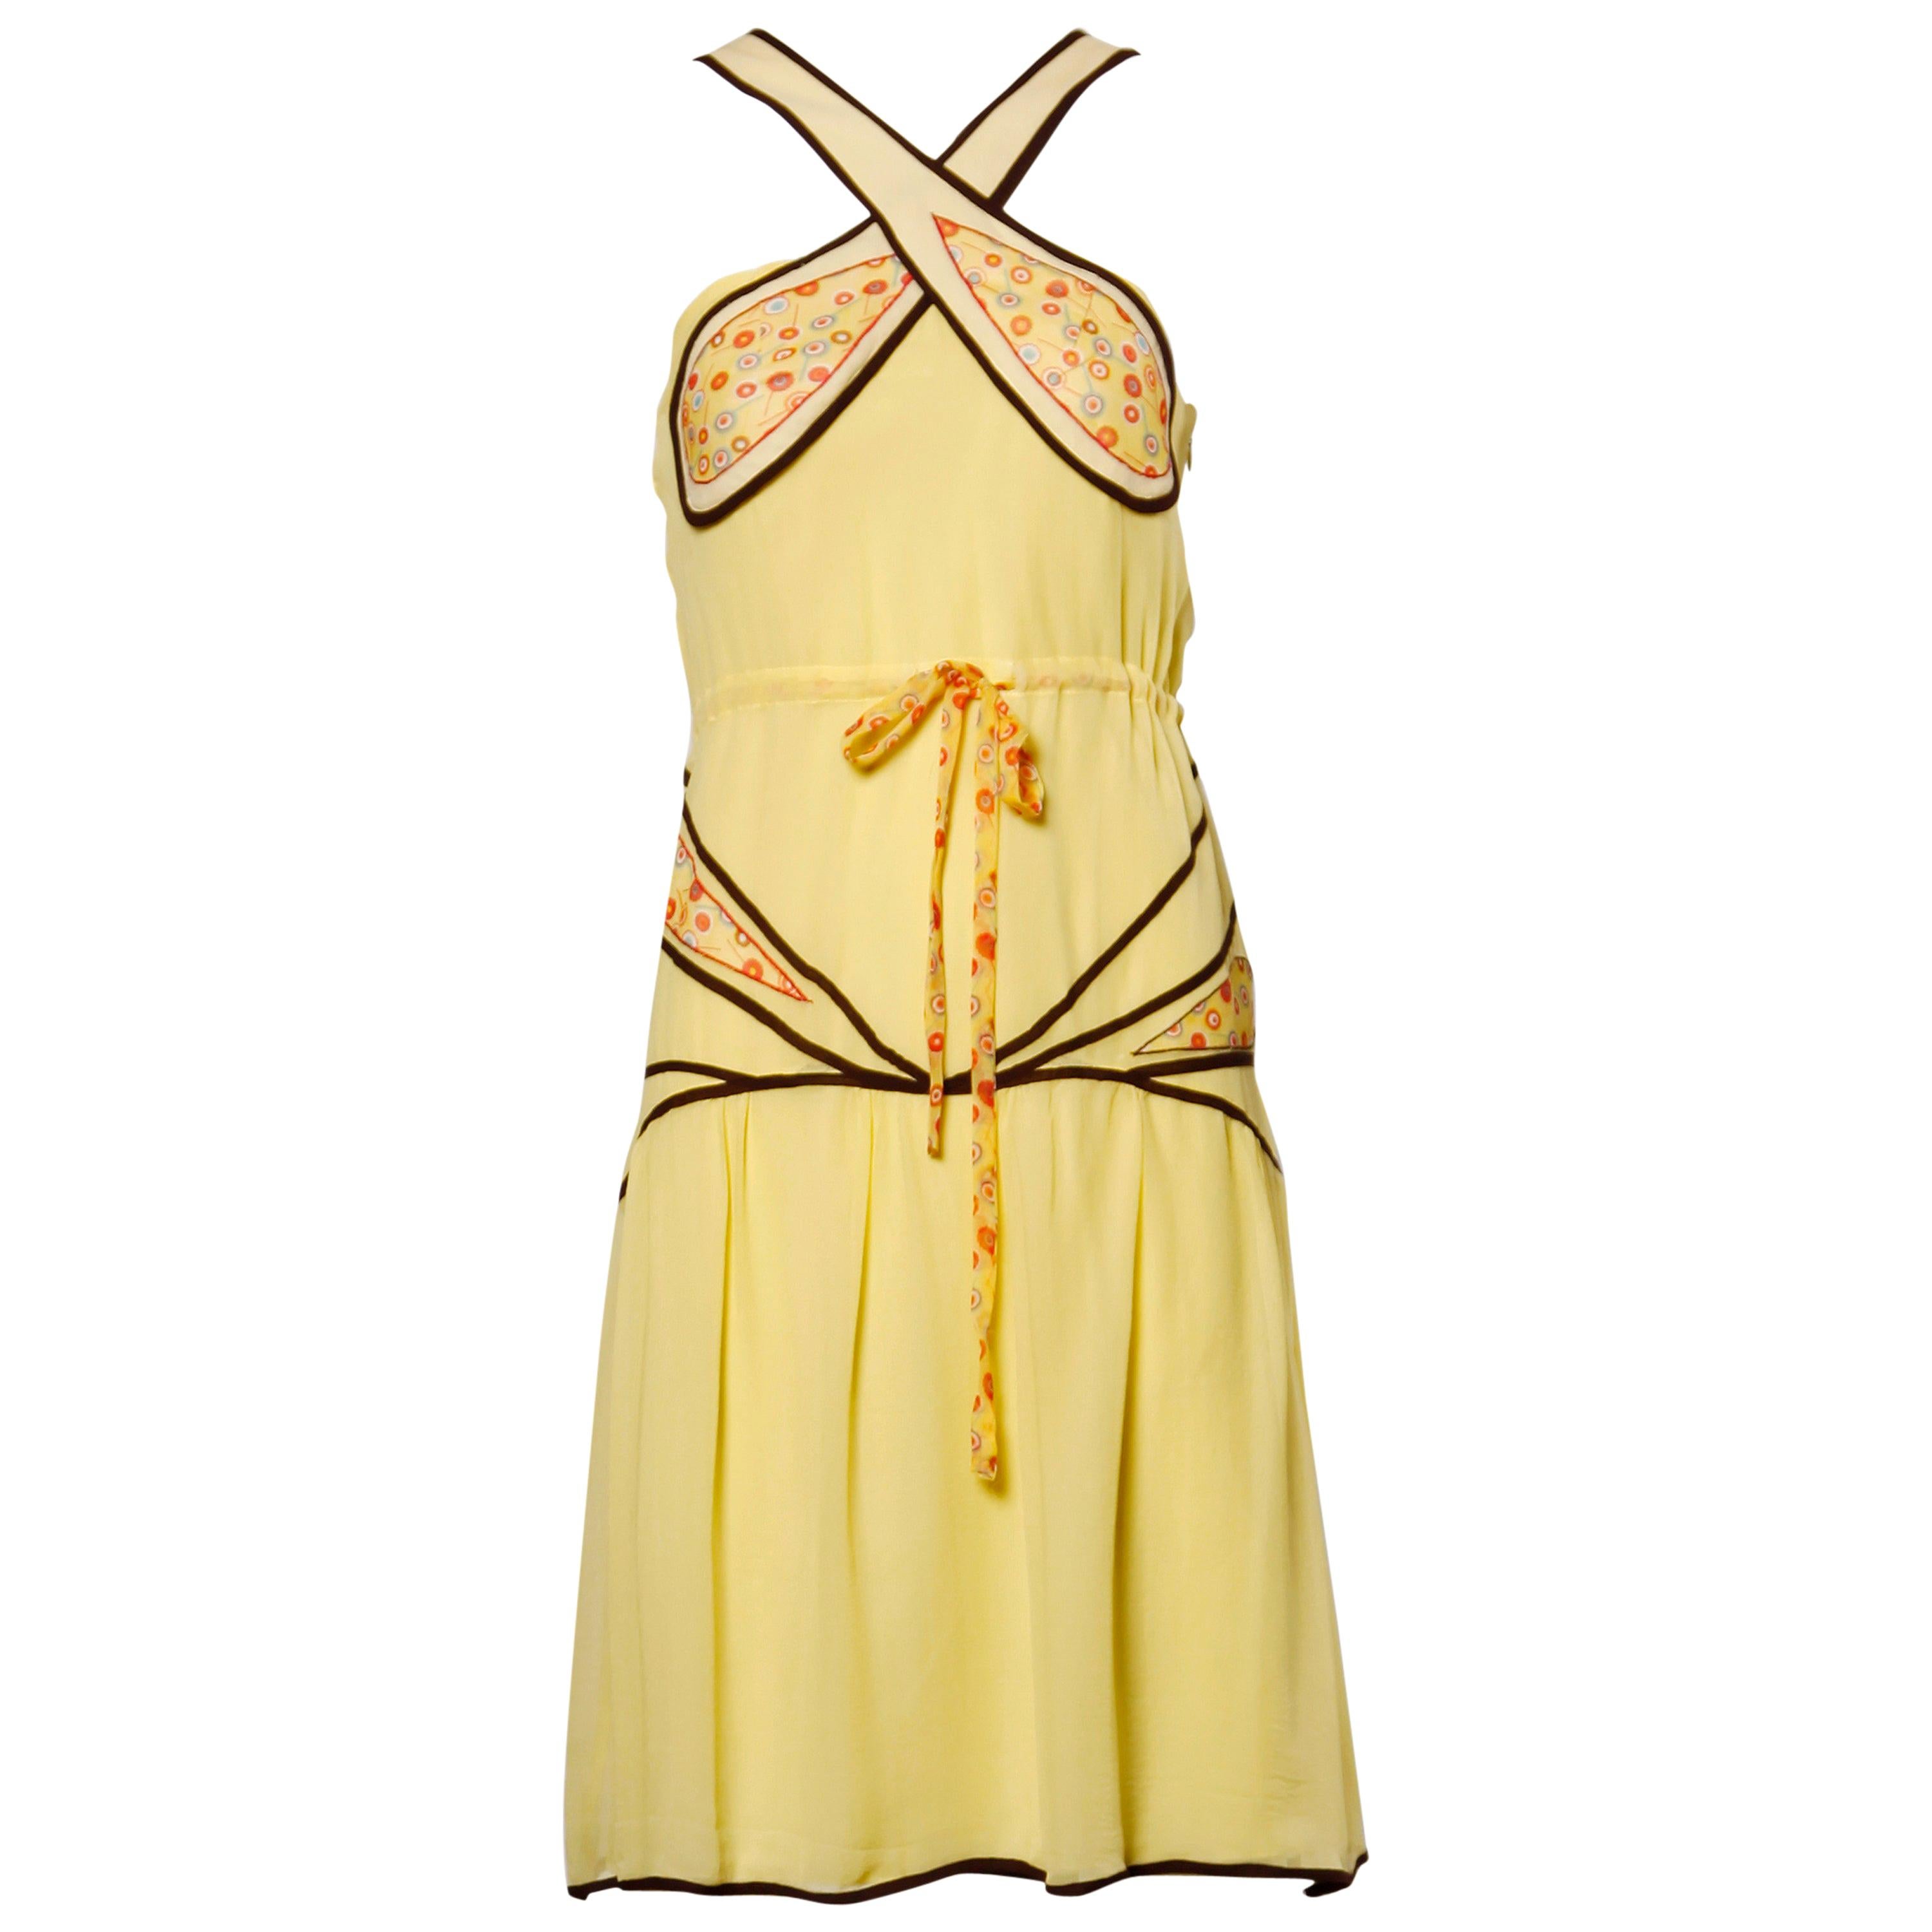 Moschino Yellow Silk Patchwork Vintage 1920s-Inspired Flapper Dress